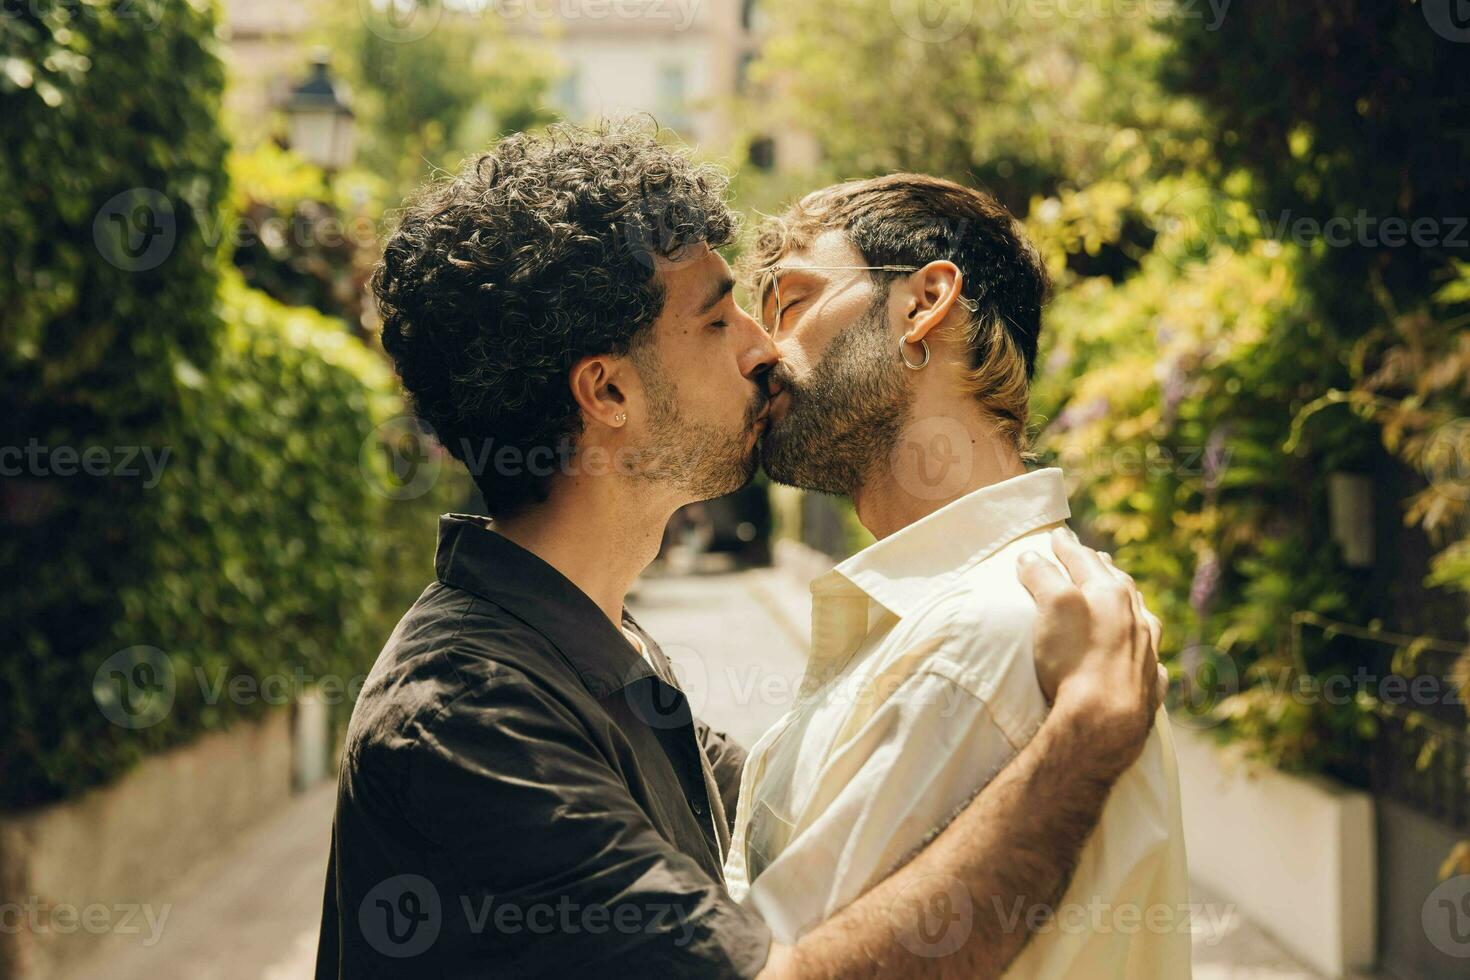 Gay couple in love embracing each other outdoors. Close-up portrait of a gay couple photo